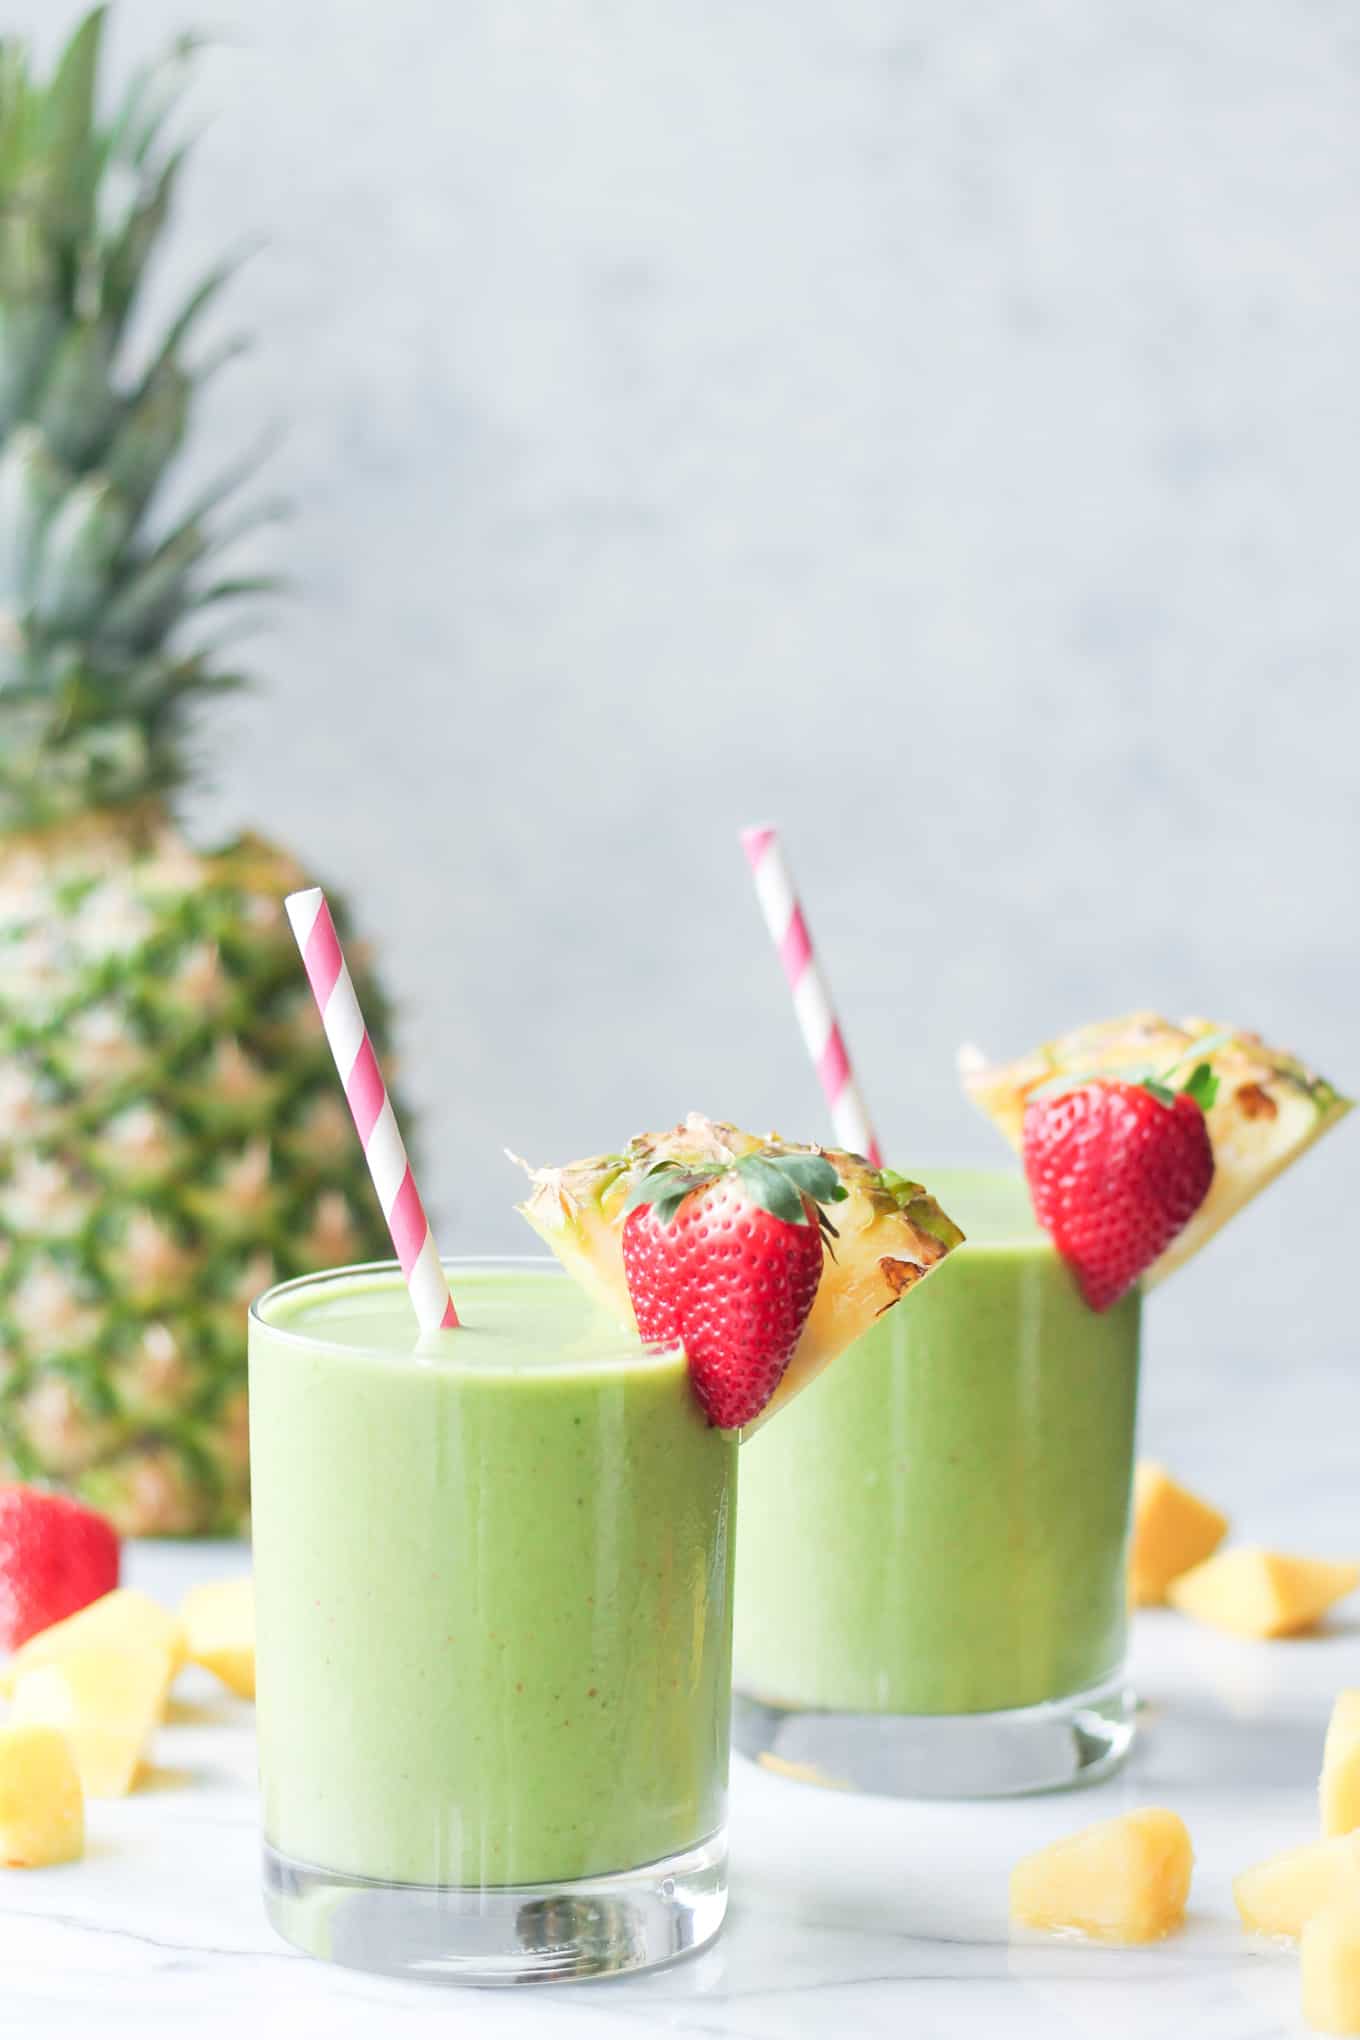 Two Tropical Island Green Smoothies in glasses with a strawberry and pineapple slice decorating the rims.